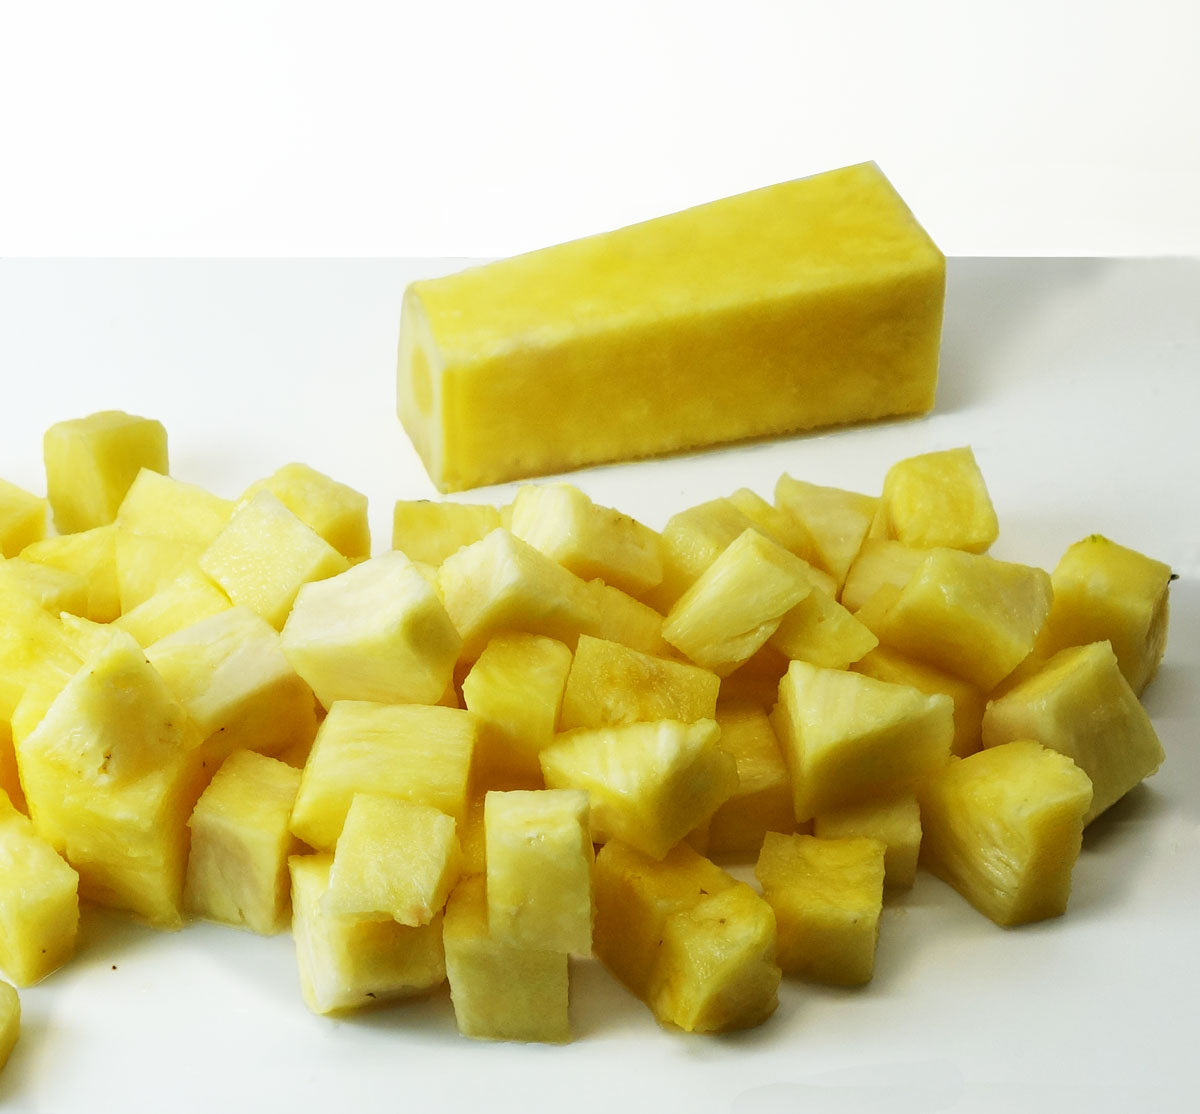 Cut the pineapple in cubes